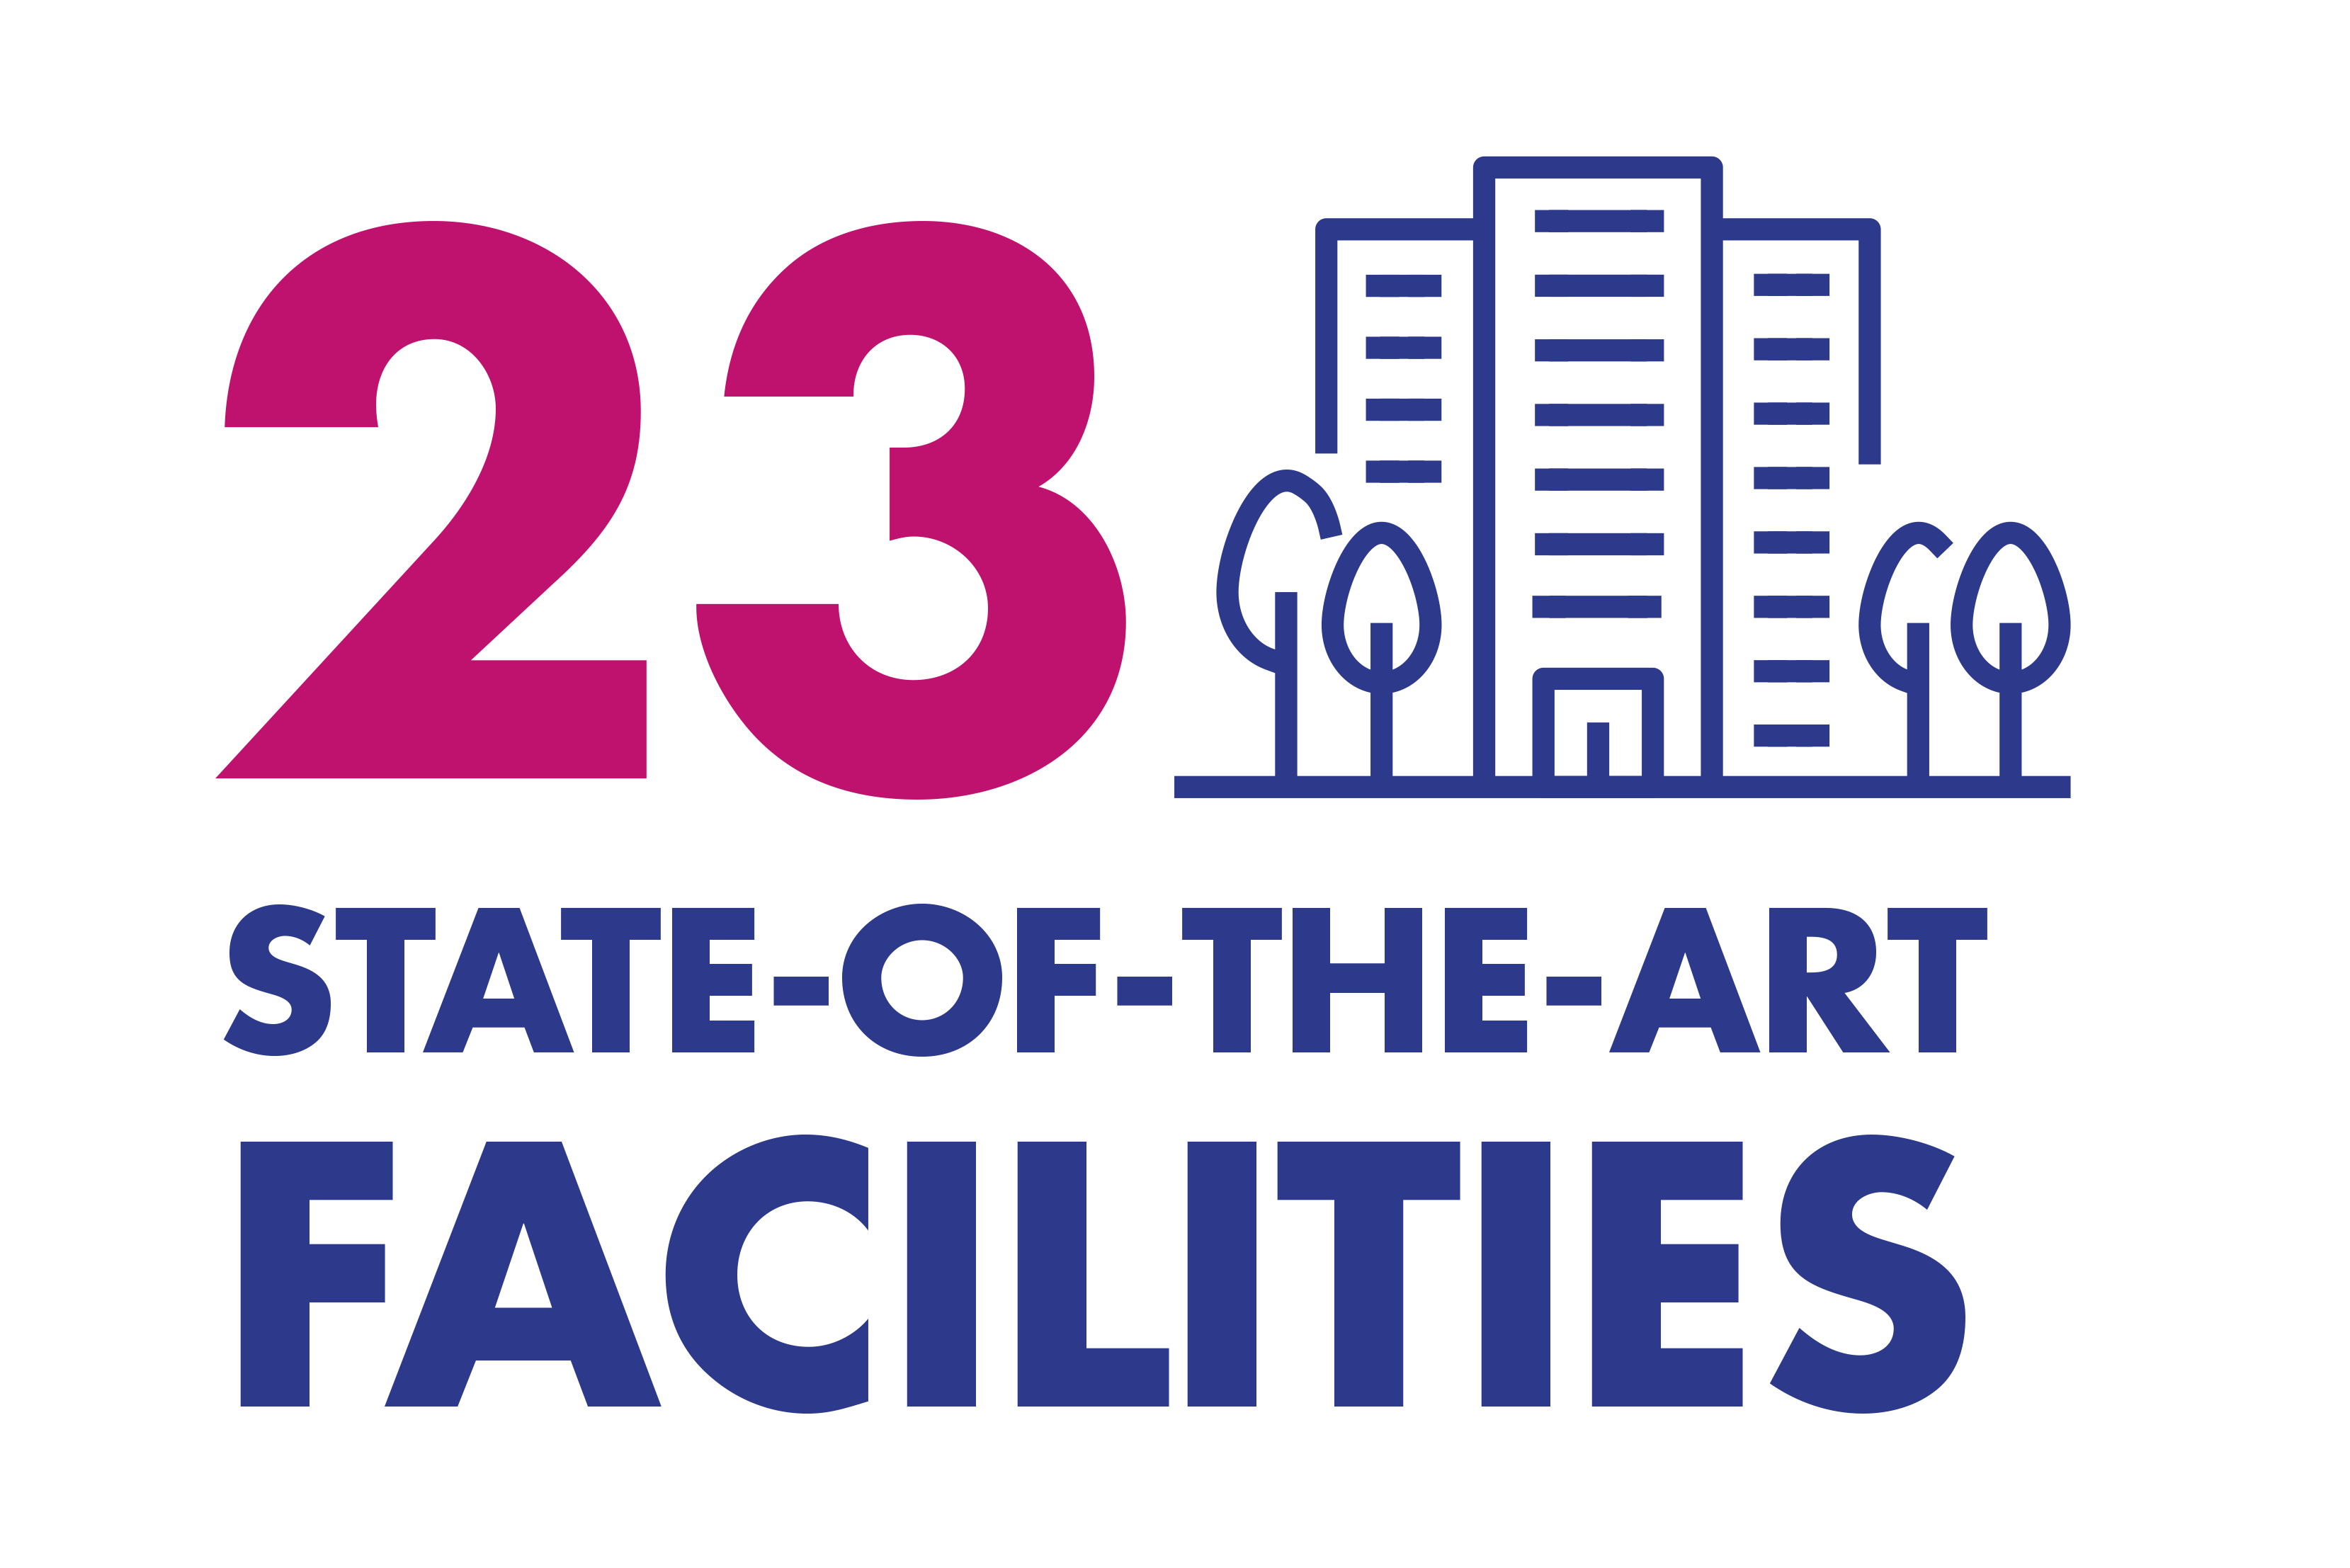 23 State-of-the-art facilities